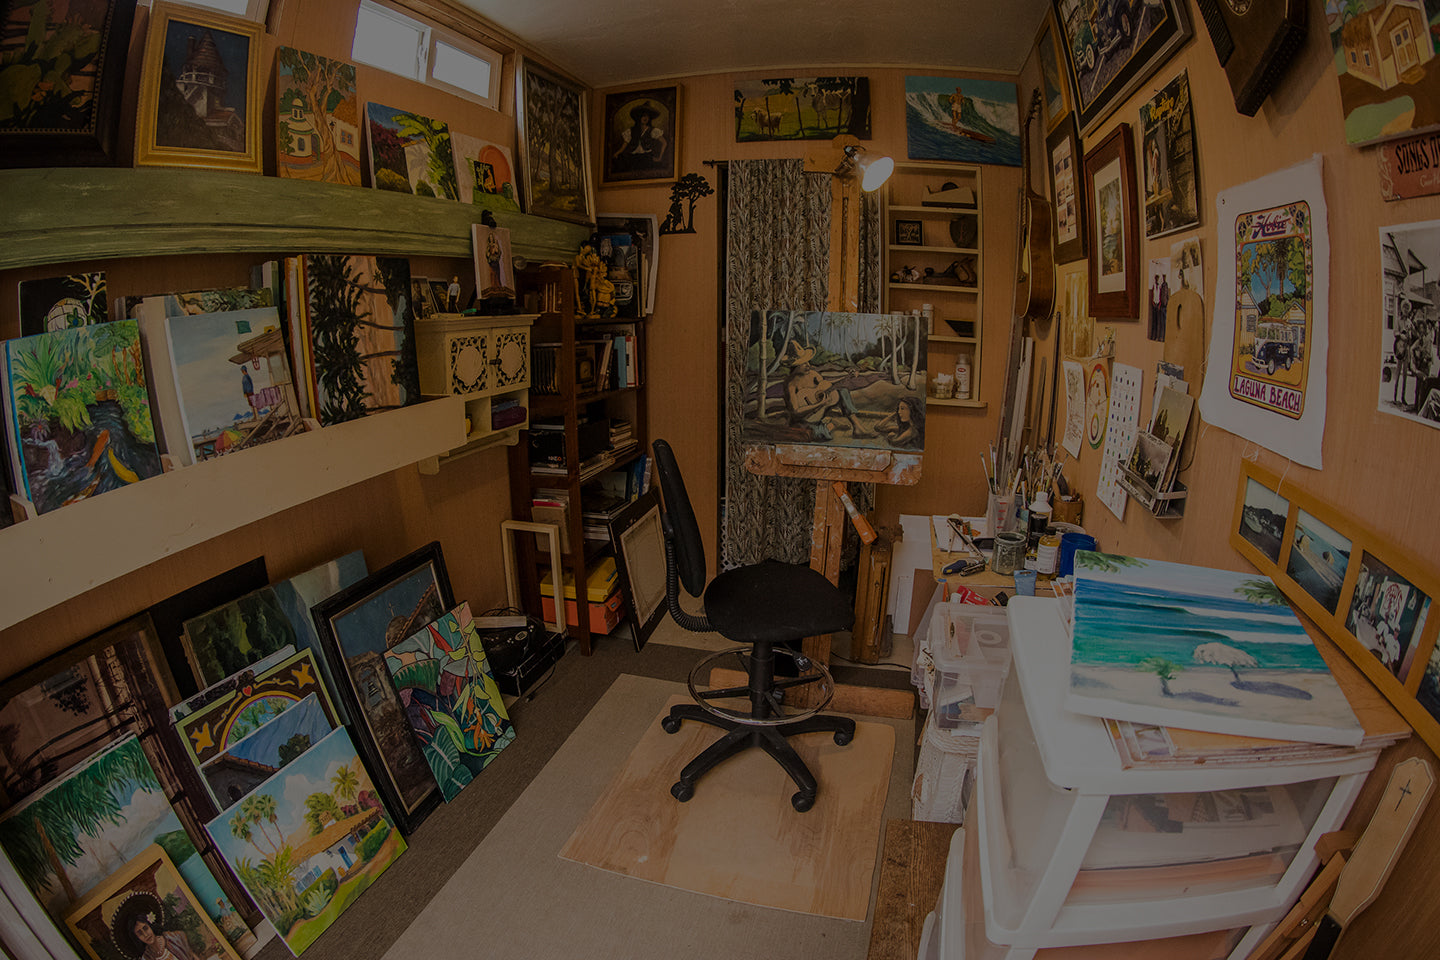 Photo inside Joe Severson's art studio. Showing paintings and collectables on display.